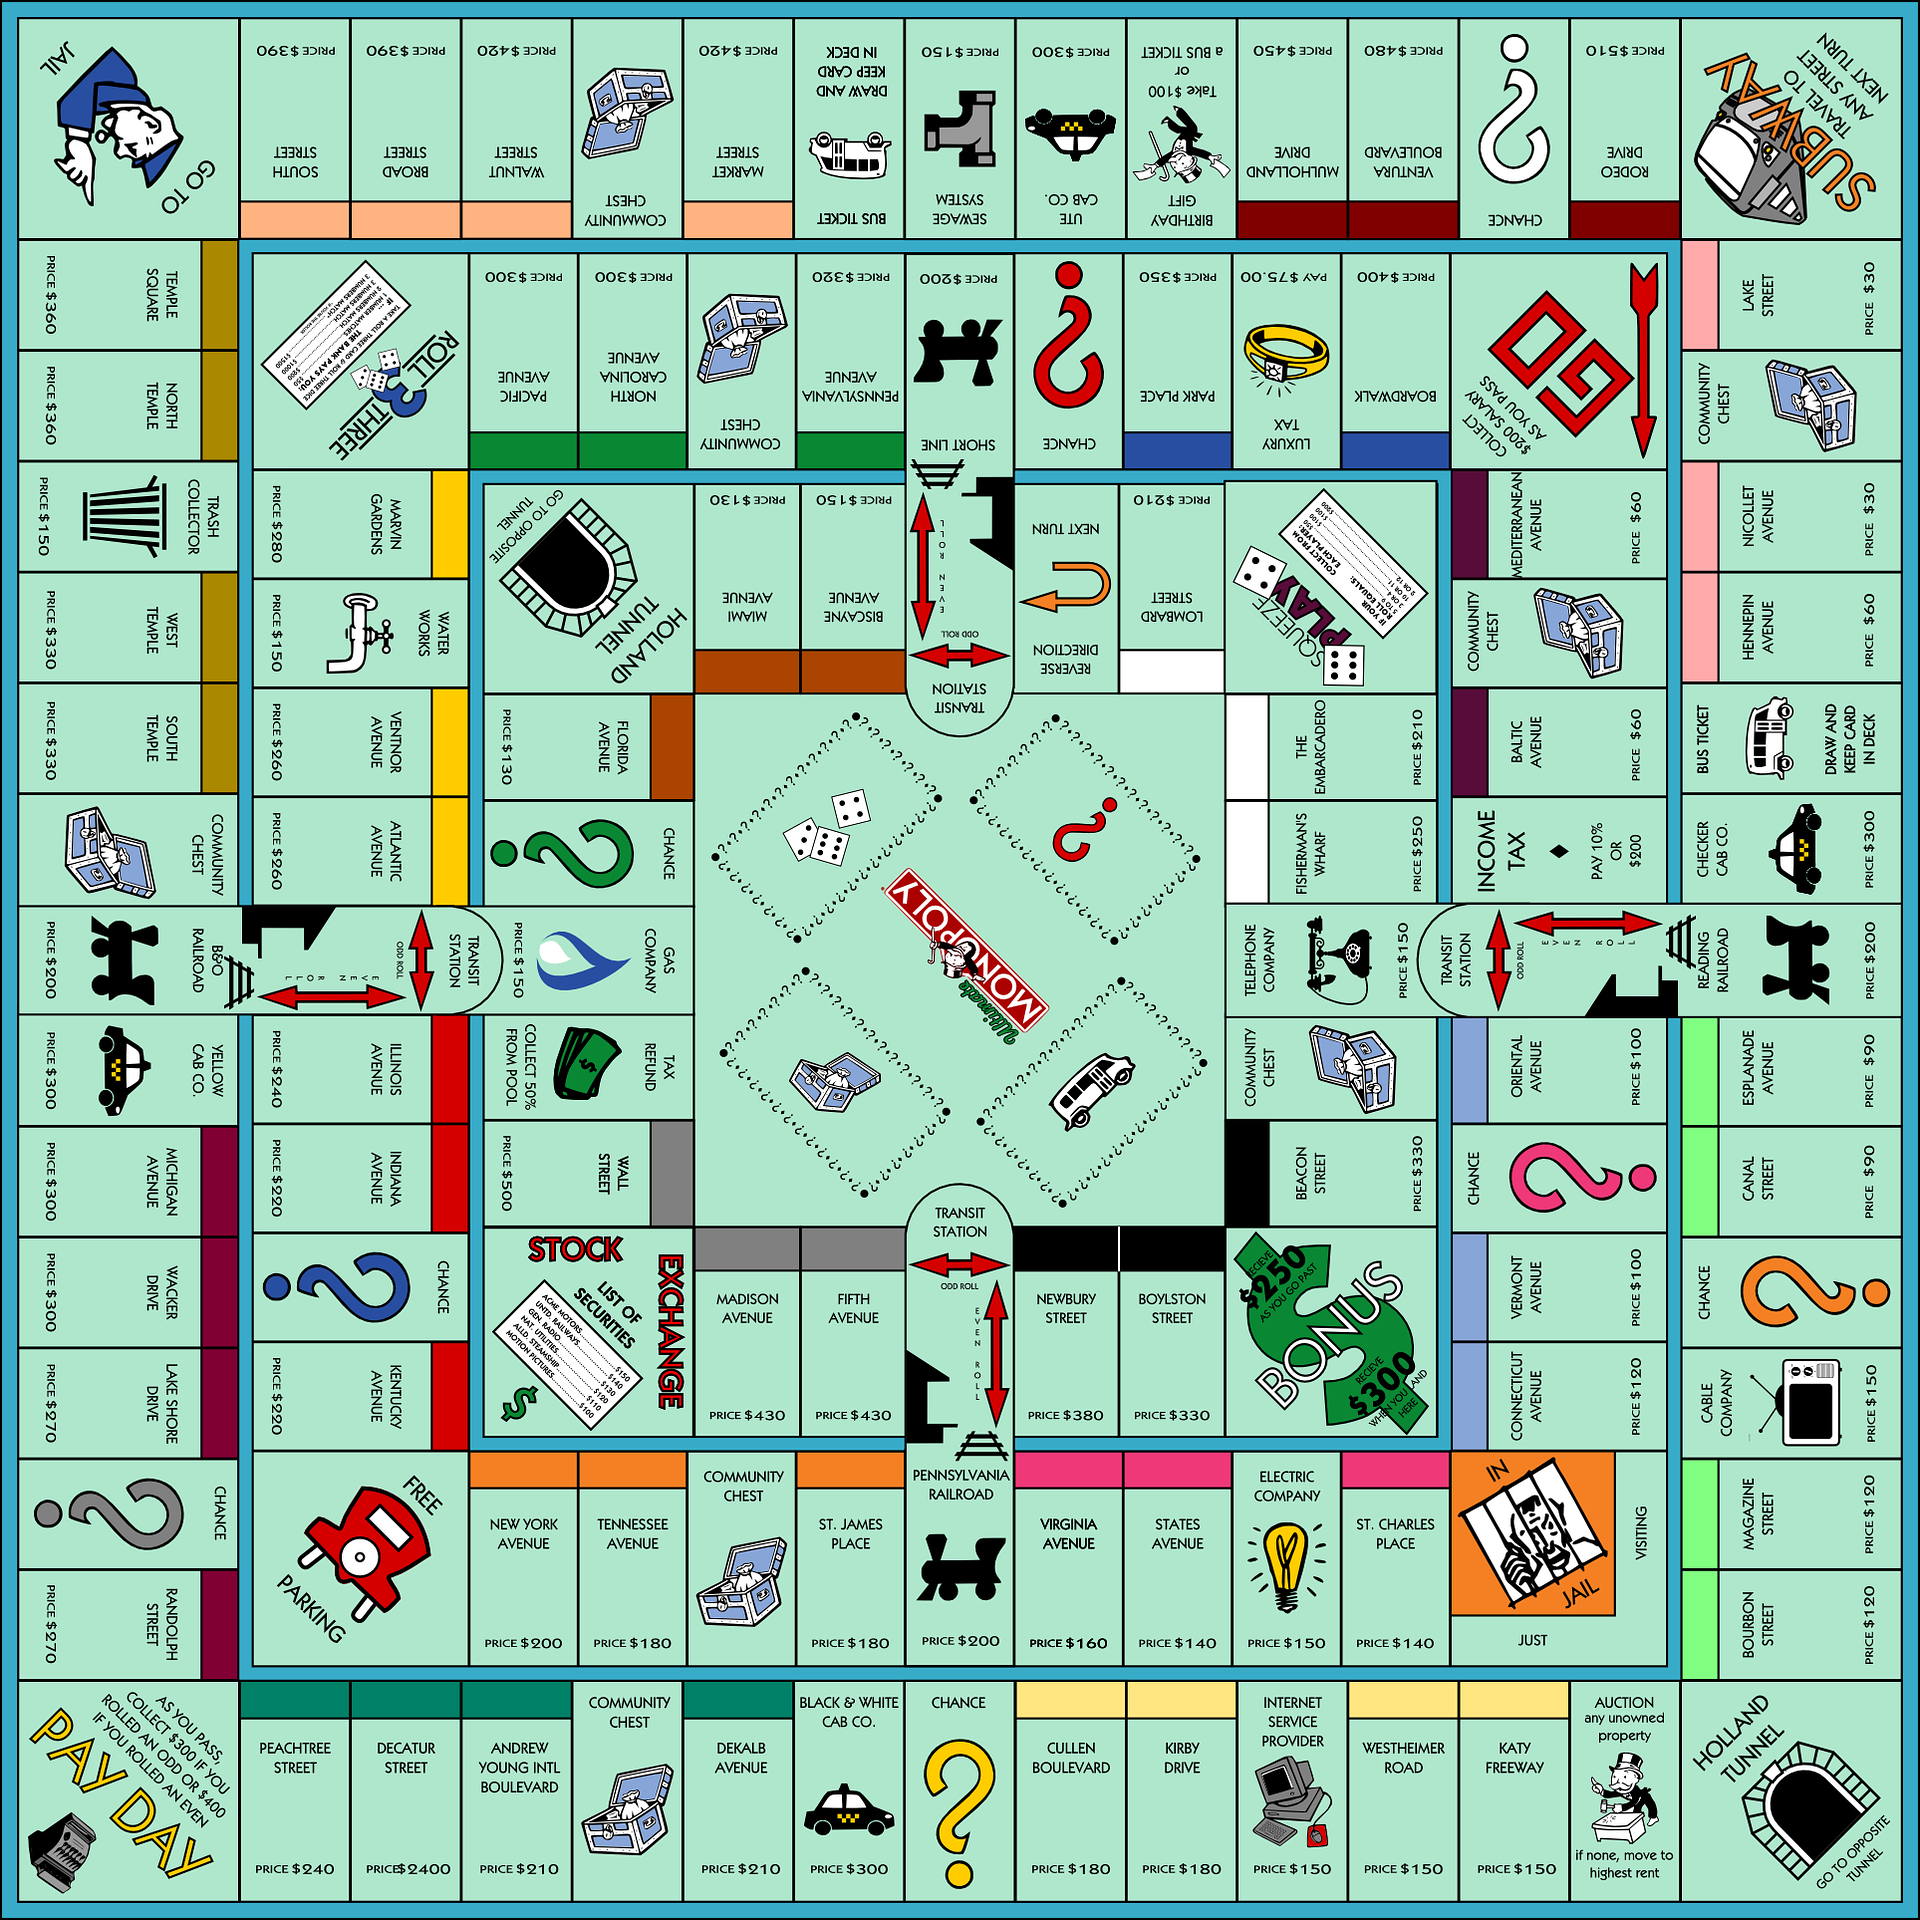 Image shown - Monopoly from Pixabay